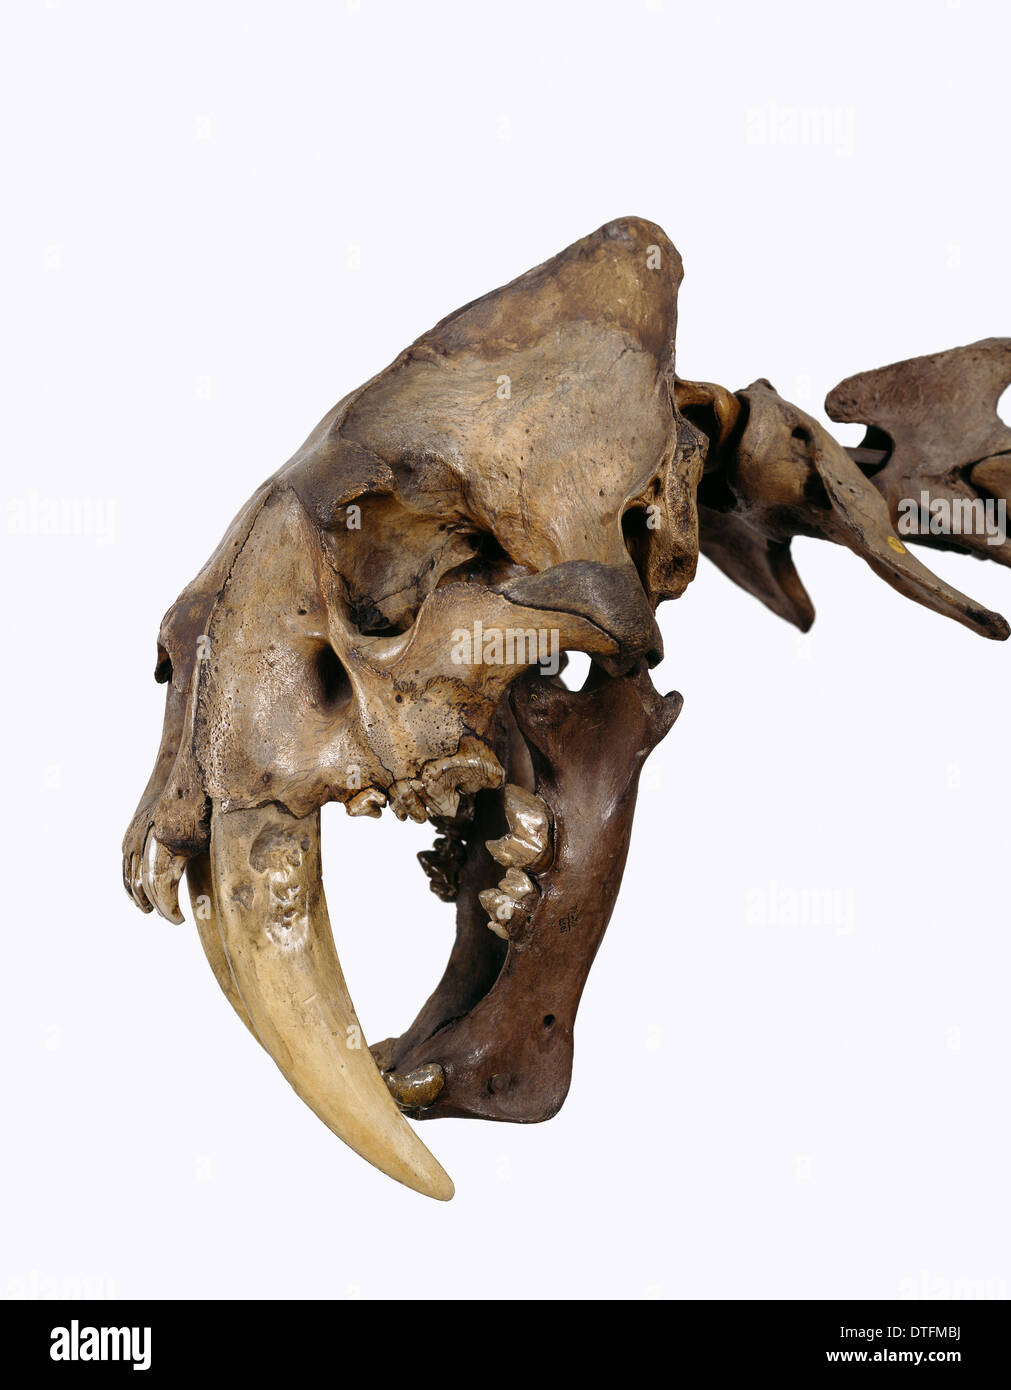 Smilodon fatalis, sabre-toothed cat Stock Photo